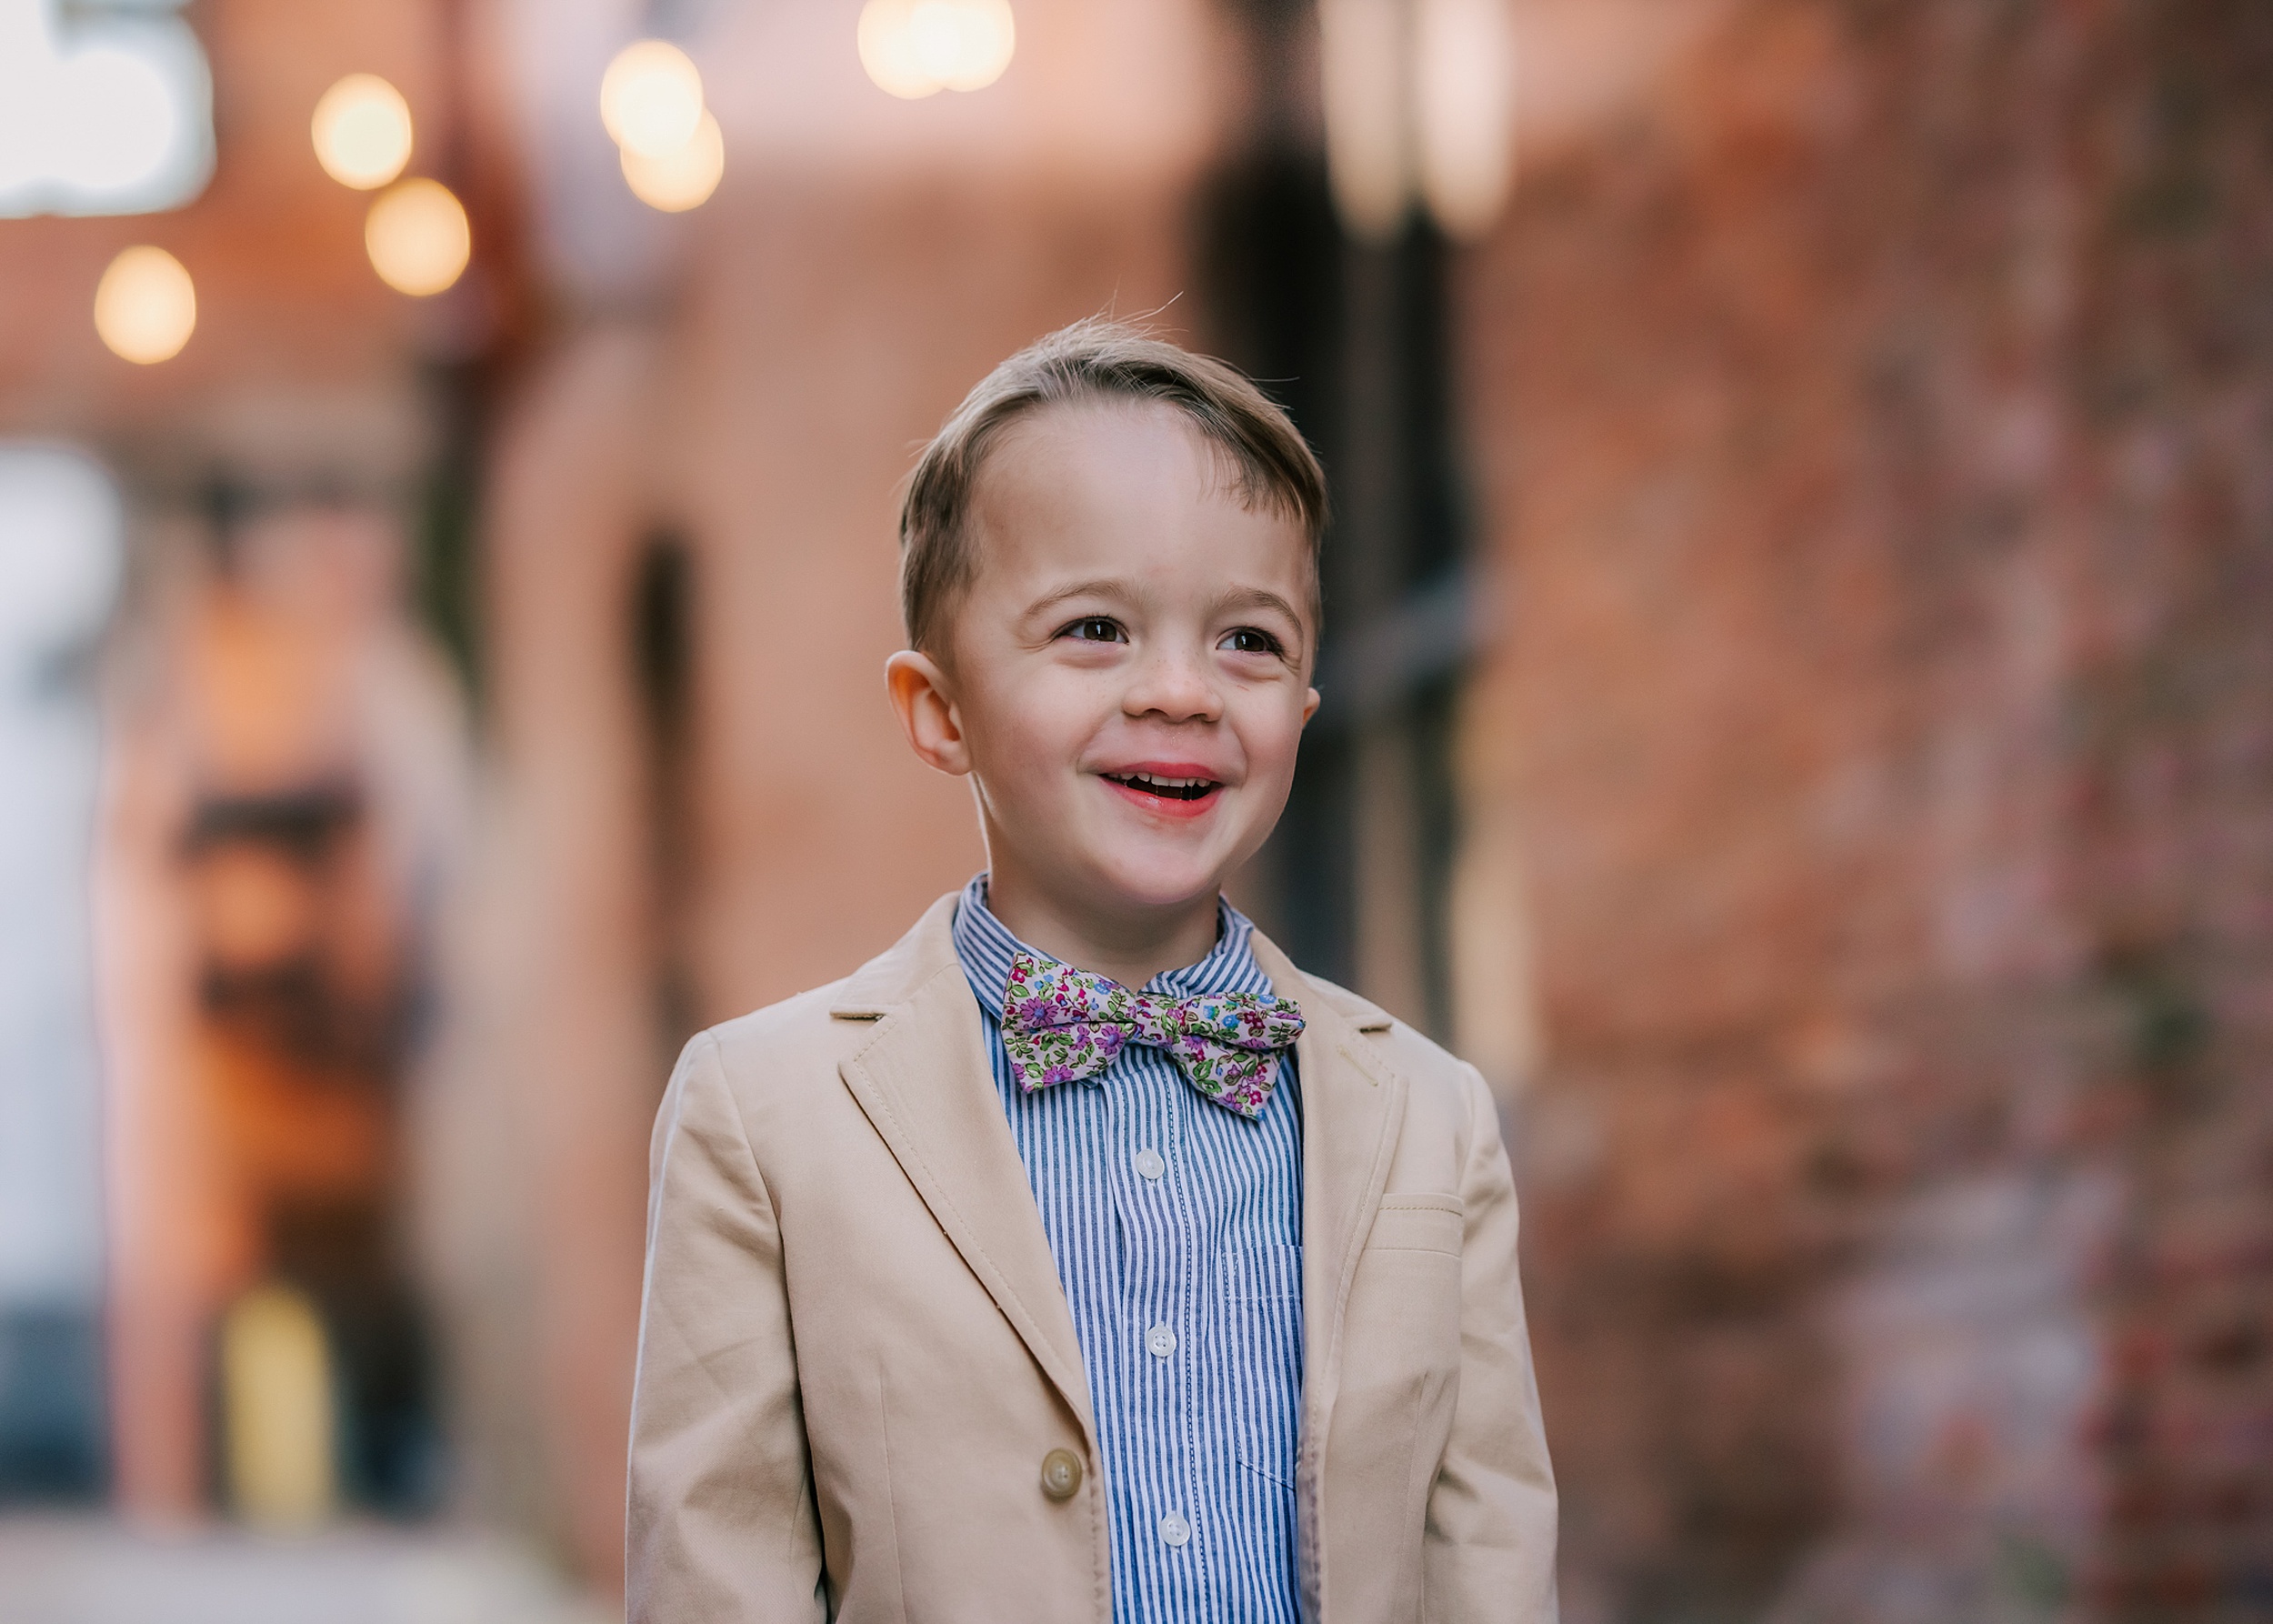 A young boy stands in an alley in a tan suit jacket, blue stripe shirt and bowtie raleigh youth sports